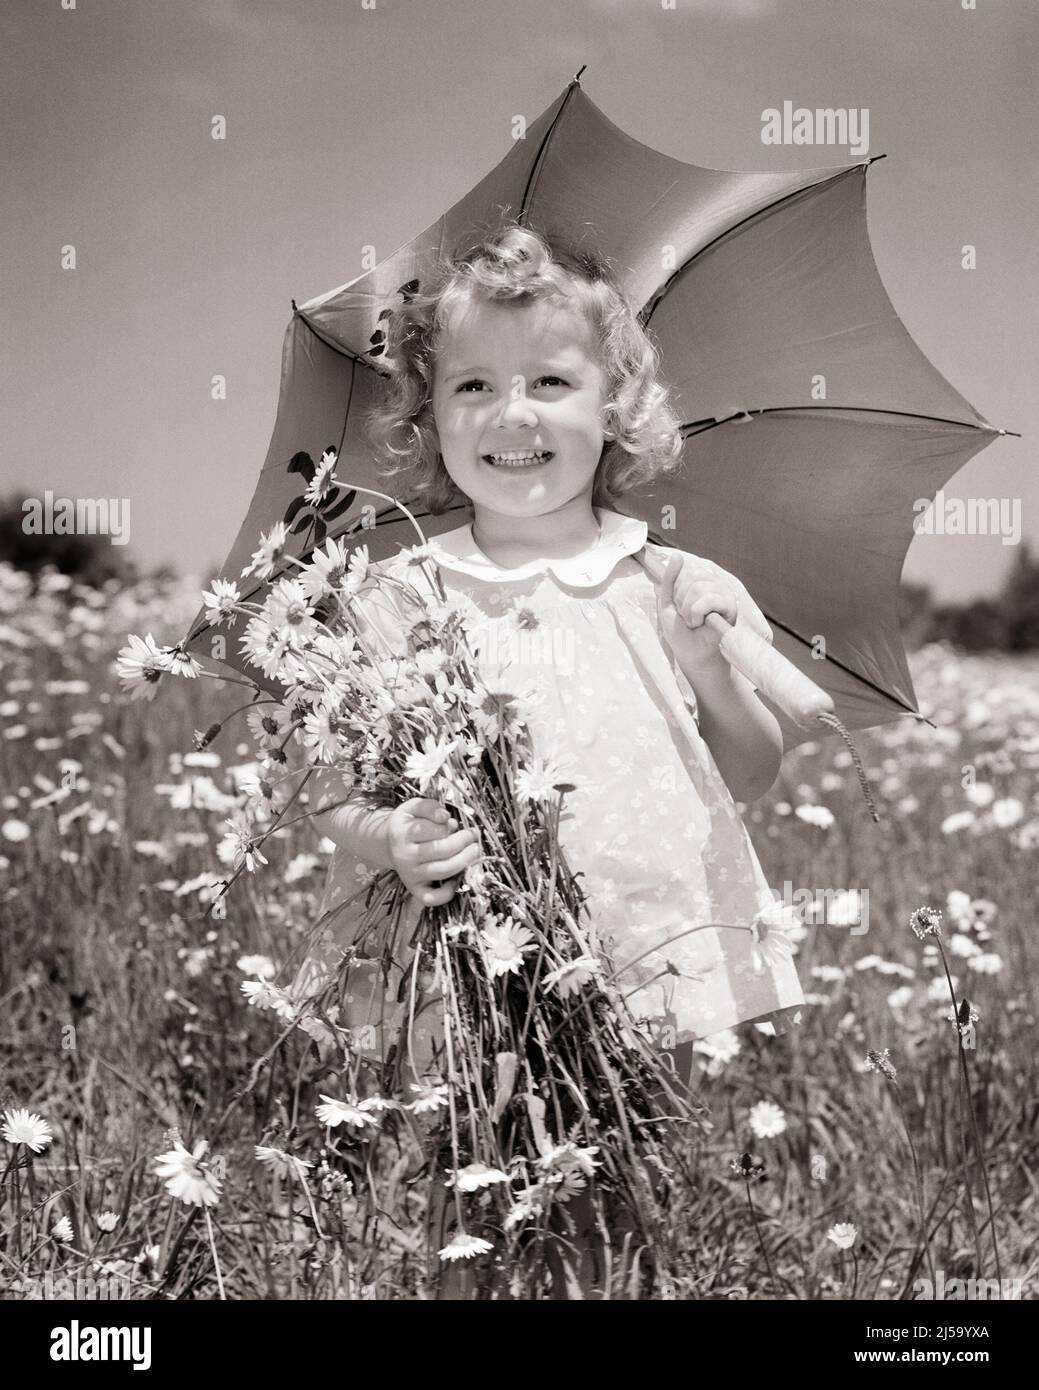 1940s SMILING LITTLE GIRL IN FIELD OF DAISIES HOLDING A BOUQUET AND SHADING FROM THE SUN WITH AN UMBRELLA - j5994 HAR001 HARS COPY SPACE HALF-LENGTH CONFIDENCE B&W DAISY SUMMERTIME EYE CONTACT DAISIES FREEDOM PRETTY HAPPINESS CHEERFUL ADVENTURE DISCOVERY AND EXCITEMENT LOW ANGLE SMILES JOYFUL PLEASANT AGREEABLE CHARMING GROWTH JUVENILES LOVABLE PLEASING SEASON SHADING WILDFLOWERS ADORABLE APPEALING BLACK AND WHITE CAUCASIAN ETHNICITY HAR001 OLD FASHIONED WINSOME Stock Photo